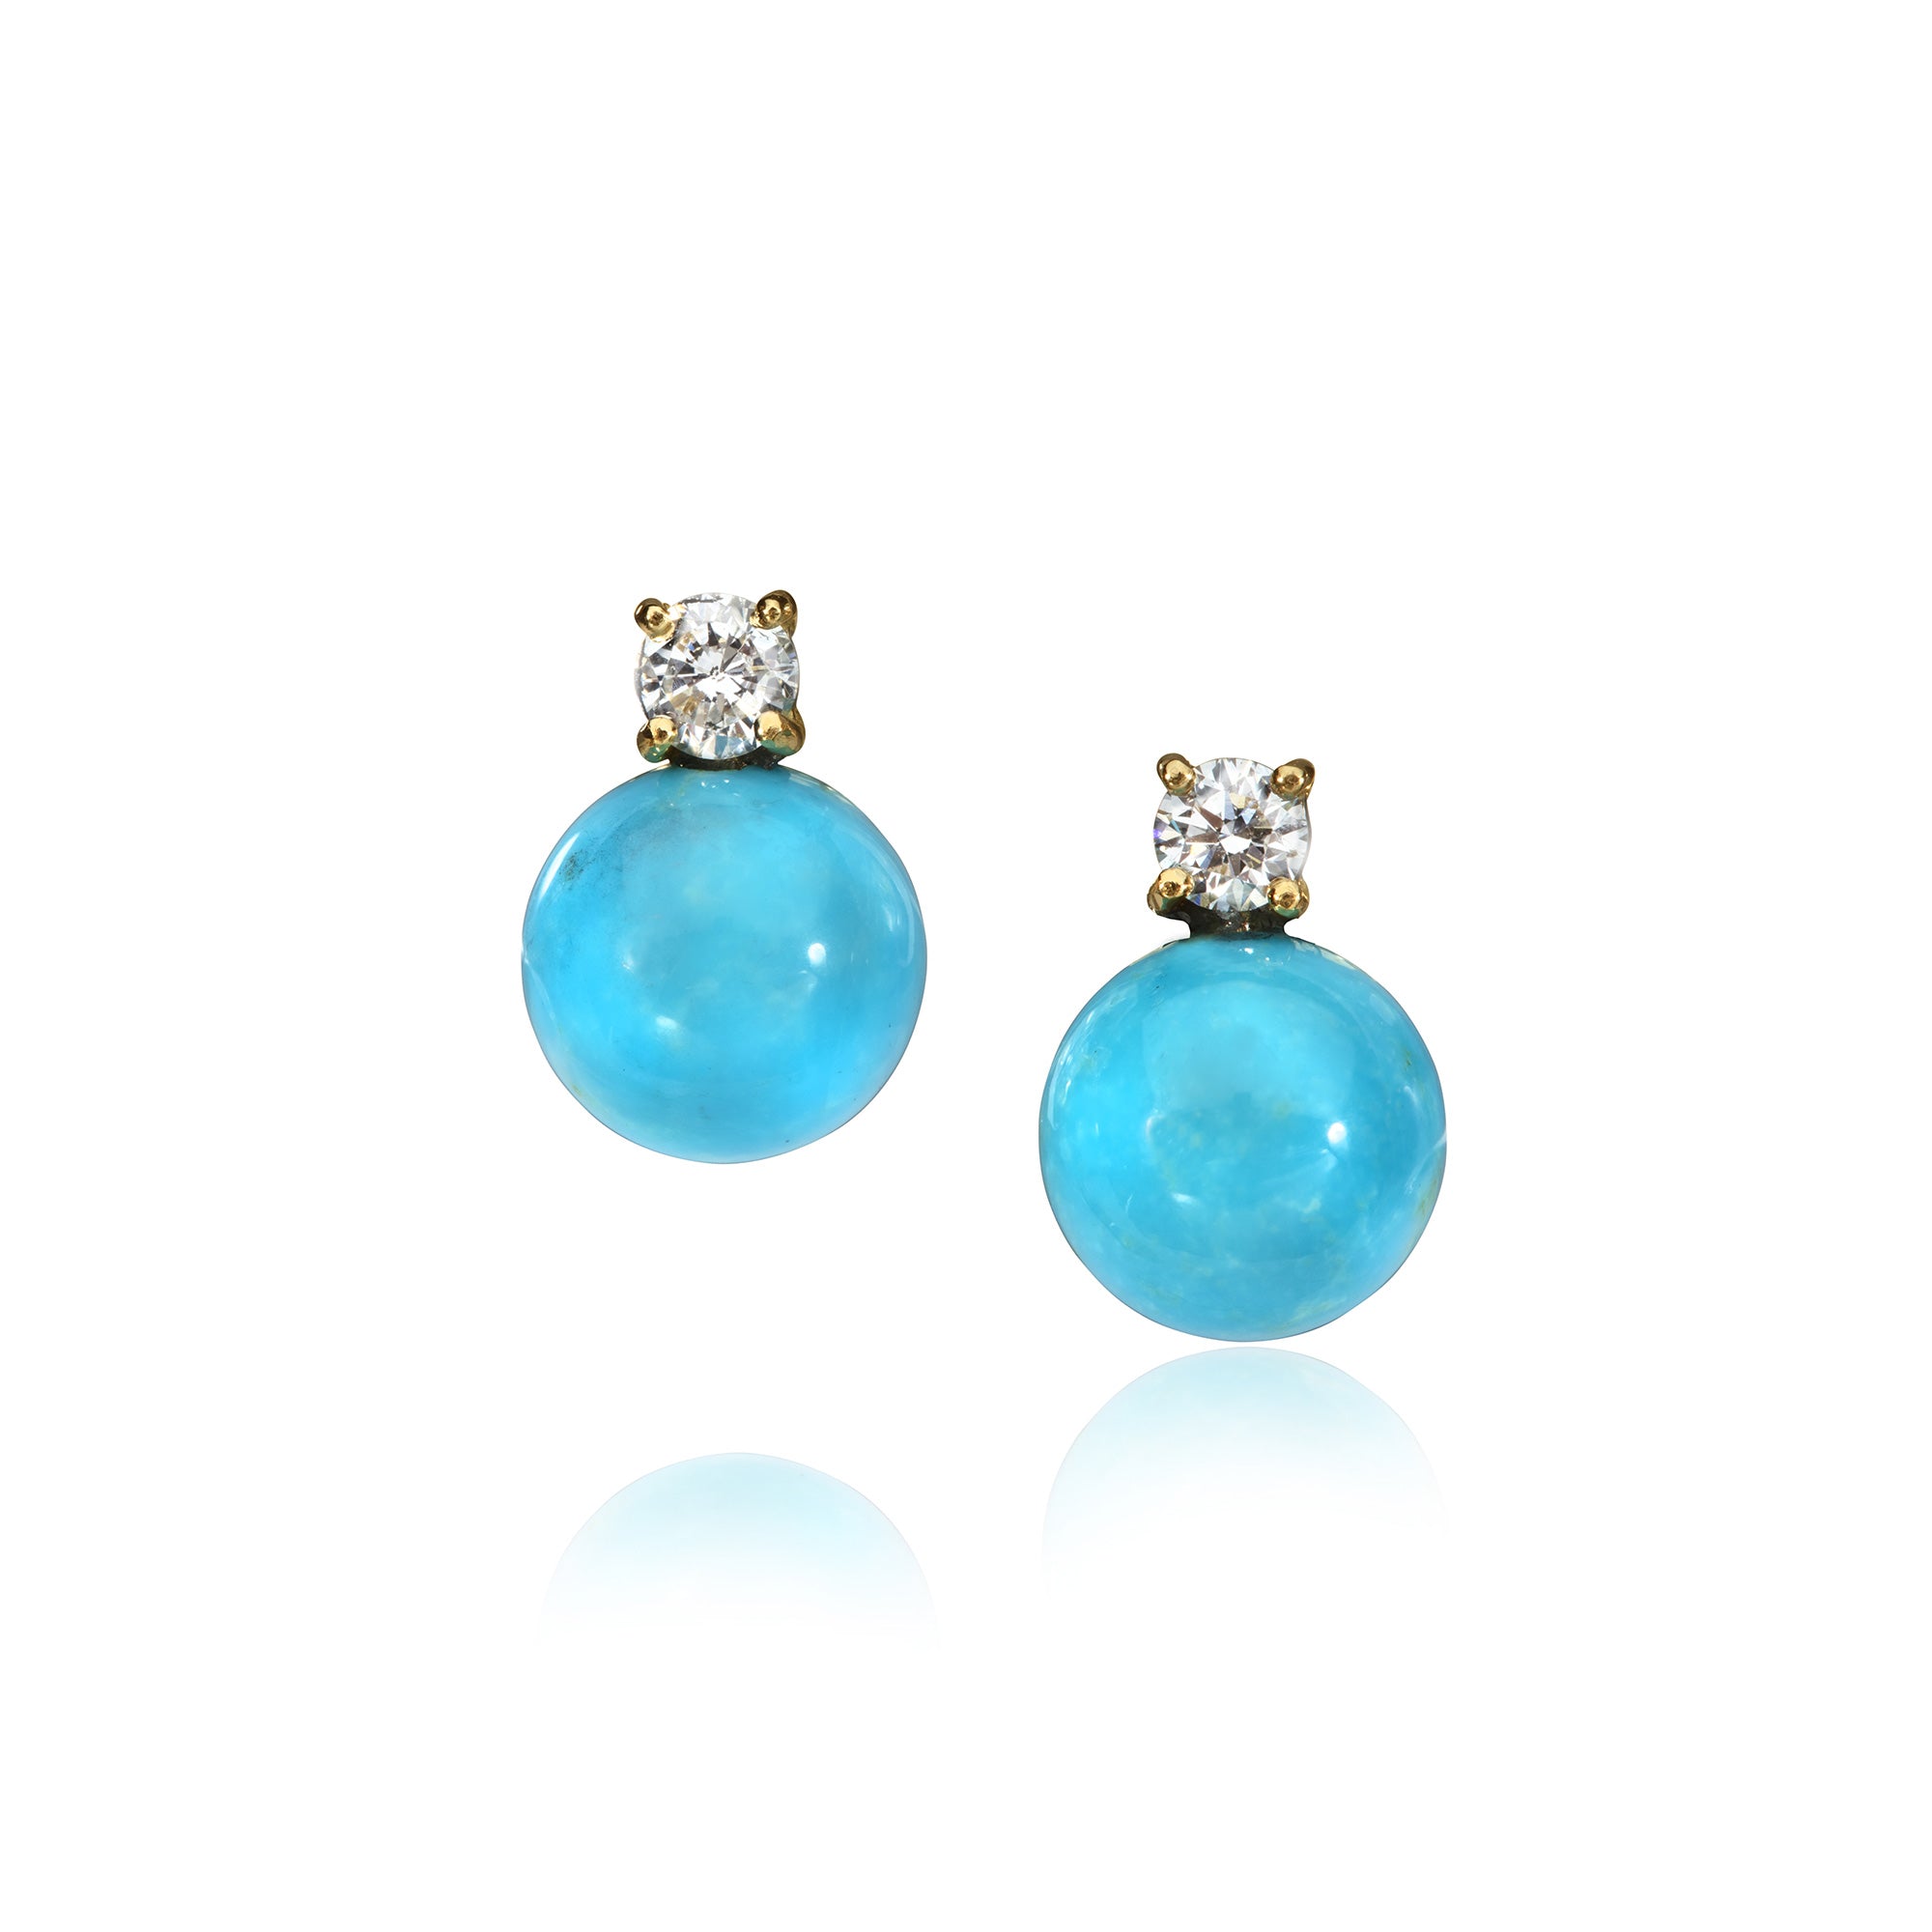 Diamond and Turquoise earrings photographed on a white background